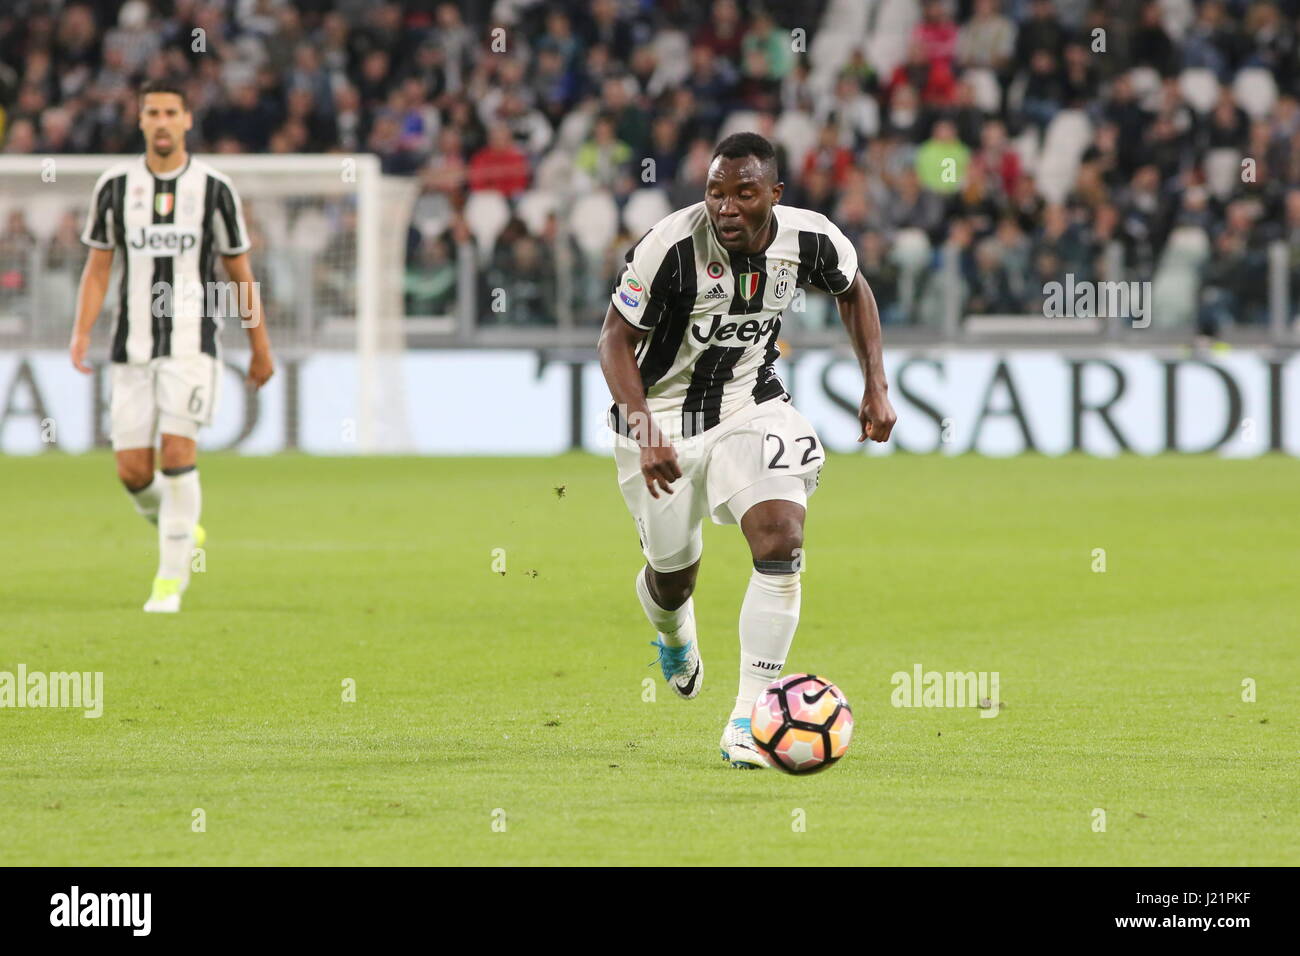 Turin, Italy. 23rd Apr, 2017. Kwadwo Asamoah (Juventus FC) in action during the Serie A football match between Juventus FC and Genoa FC at Juventus Stadium on April 23, 2017 in Turin, Italy. Credit: Massimiliano Ferraro/Alamy Live News Stock Photo